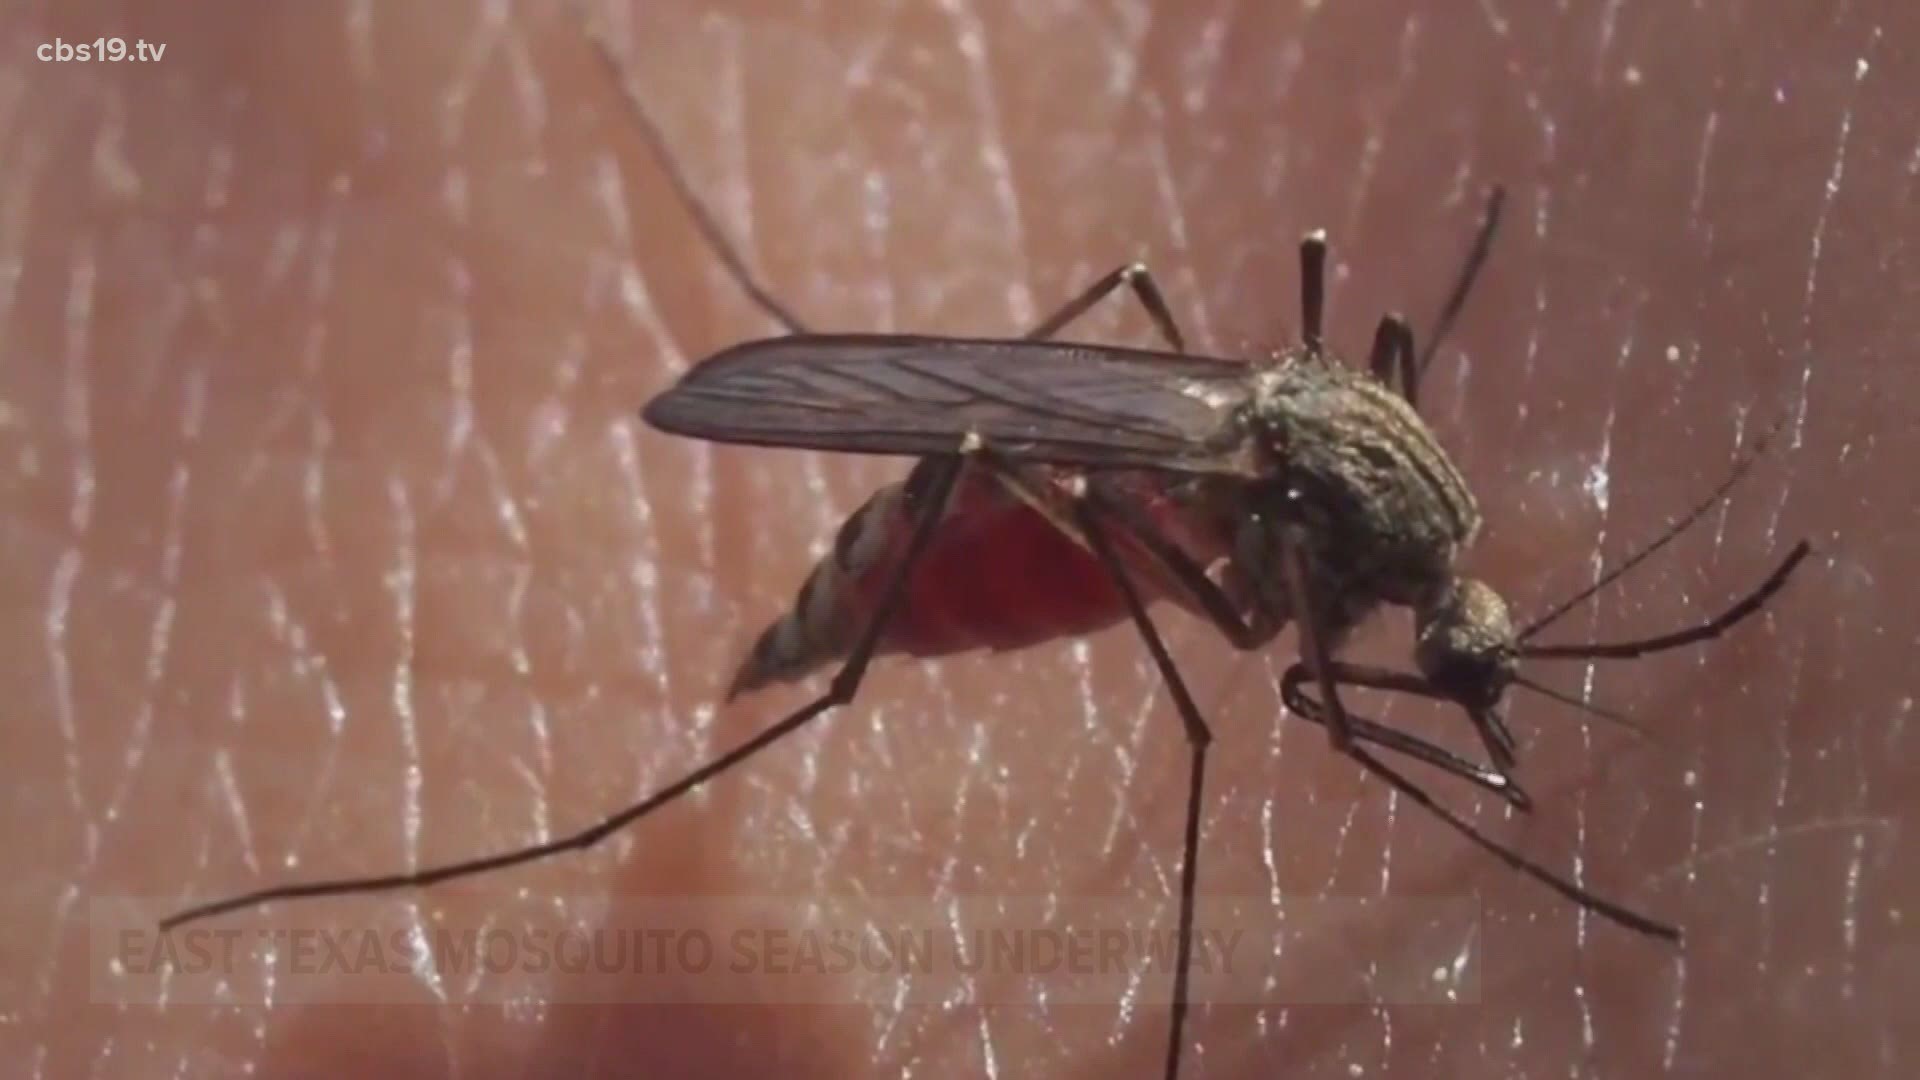 While the February freeze harmed many East Texas plants and fish, Randy Rexroalt says it had the opposite effect on mosquitos.